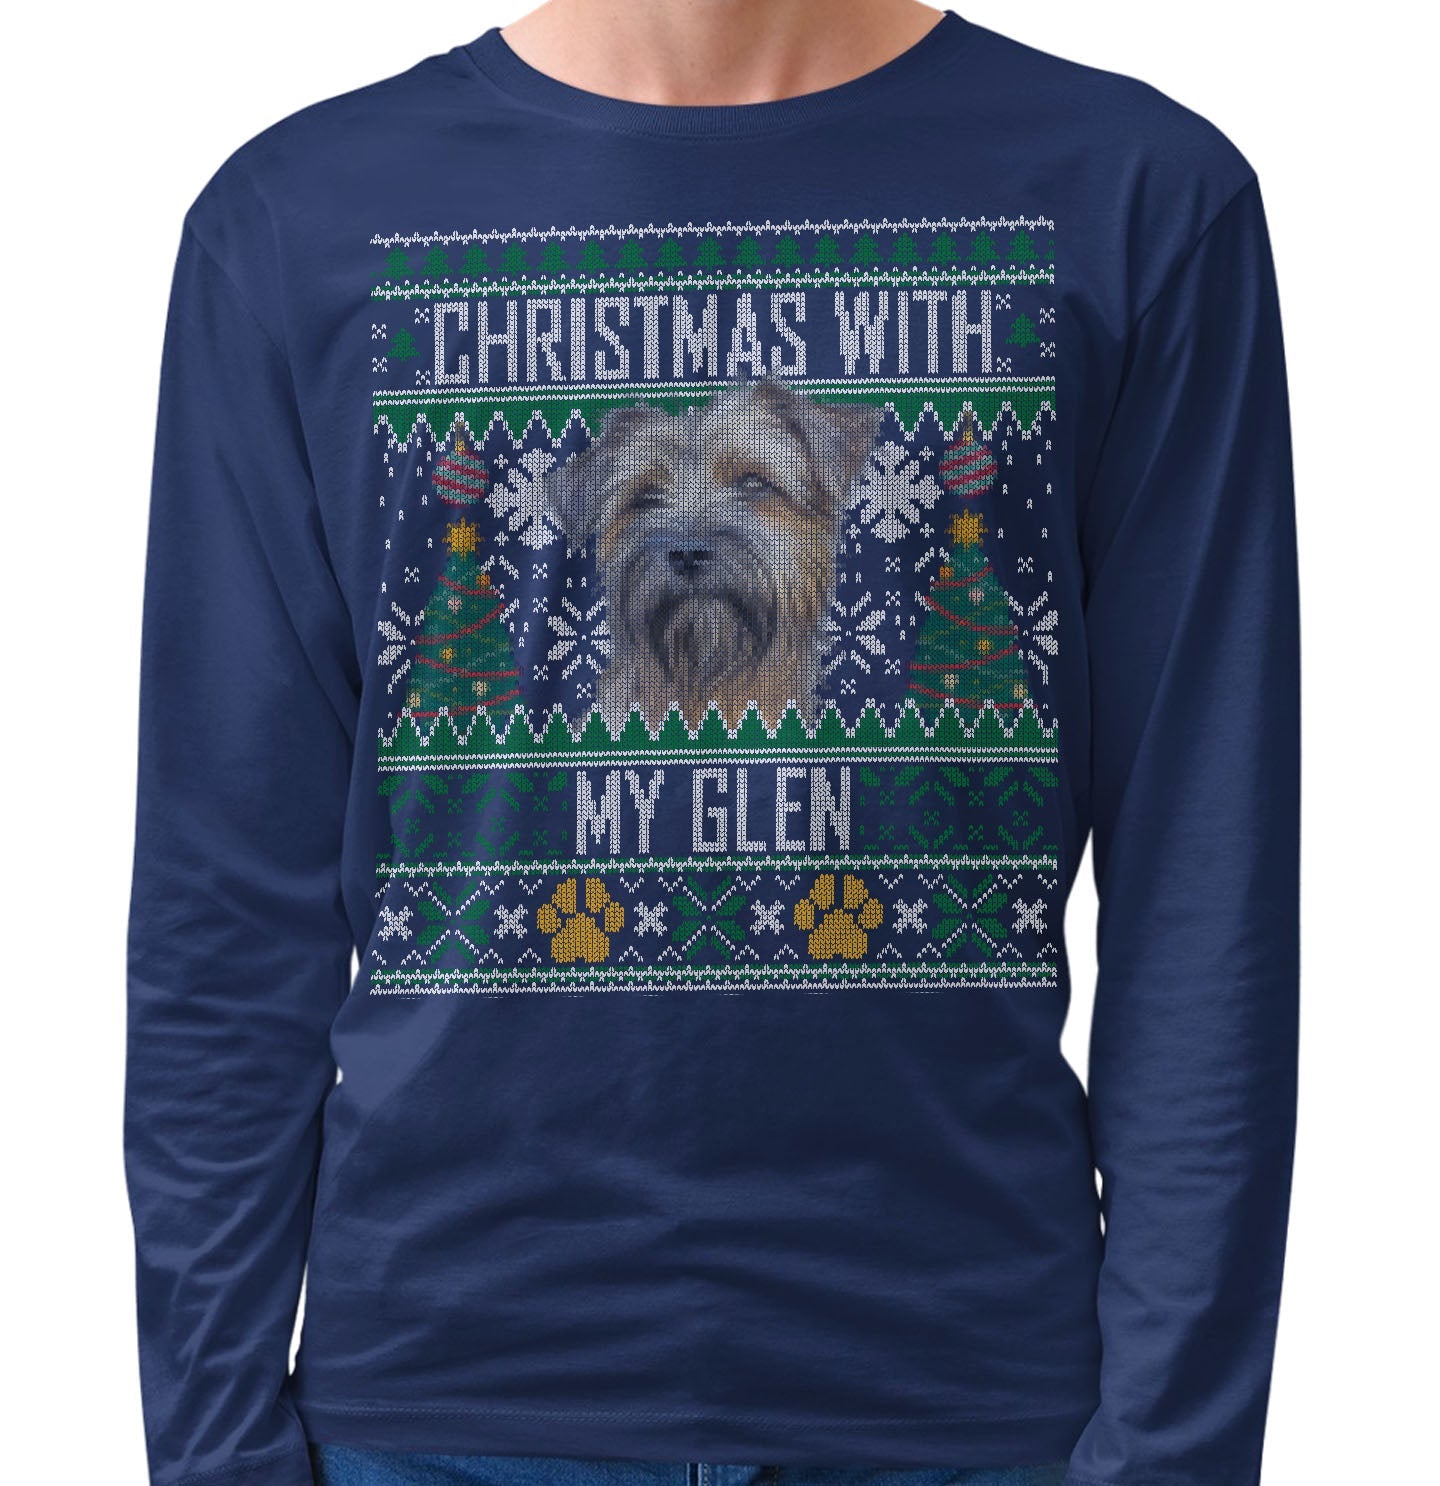 Ugly Sweater Christmas with My Glen of Imaal Terrier - Adult Unisex Long Sleeve T-Shirt